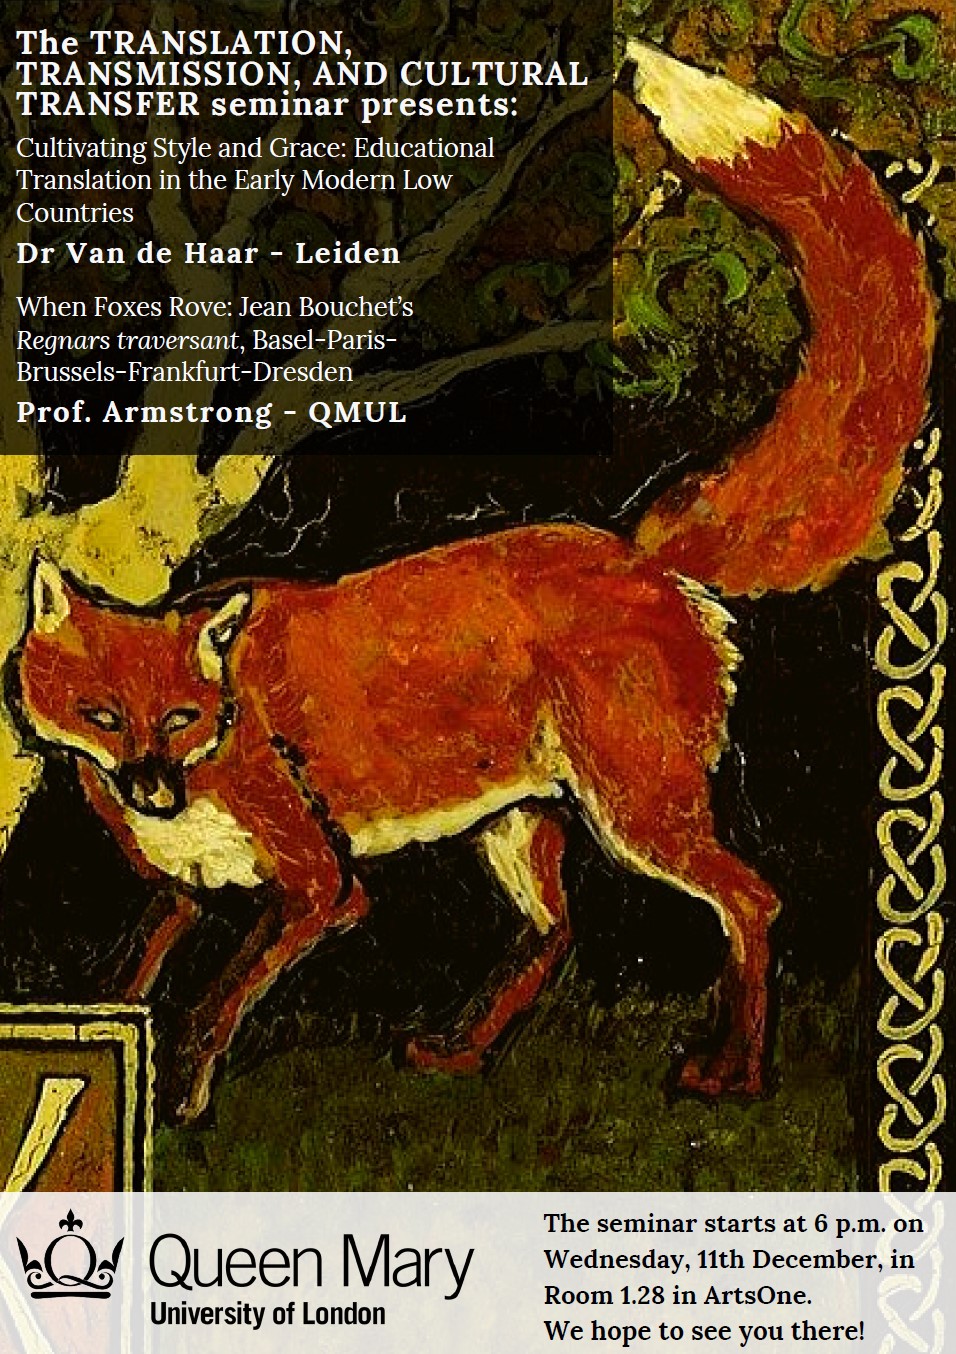 poster for the Dec TTCT seminar including an image of a fox